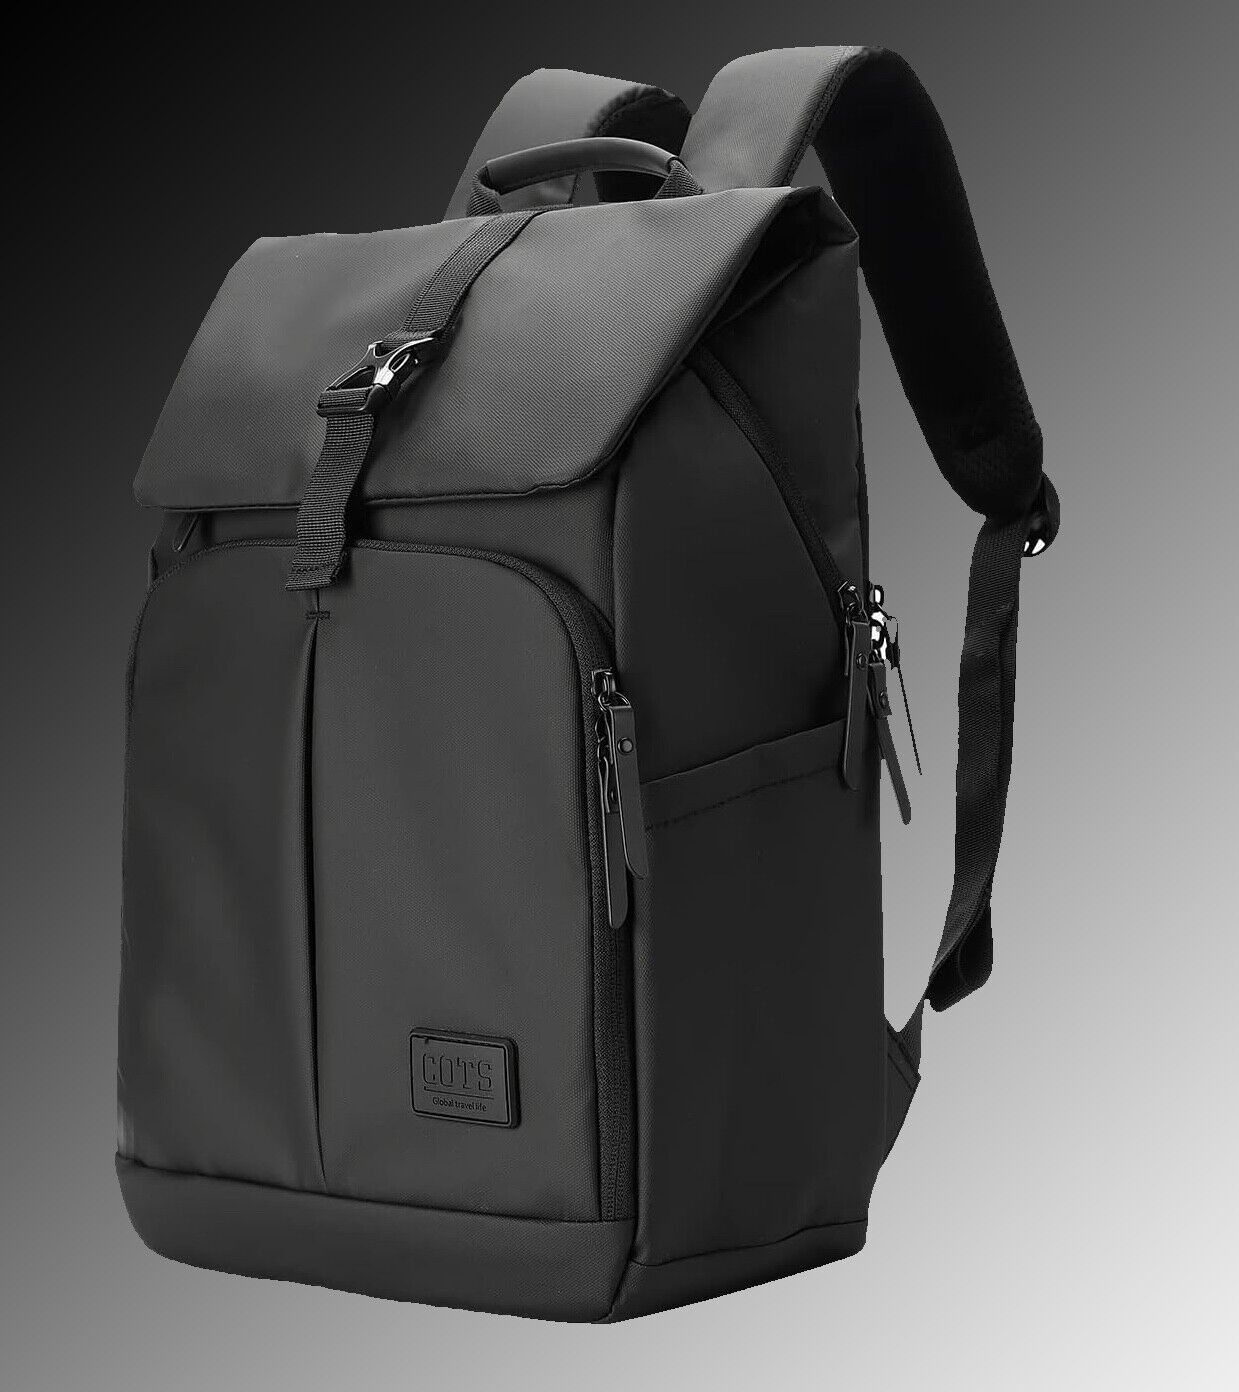 COTS Laptop Backpack for Work, Business Travel Fits 15.6